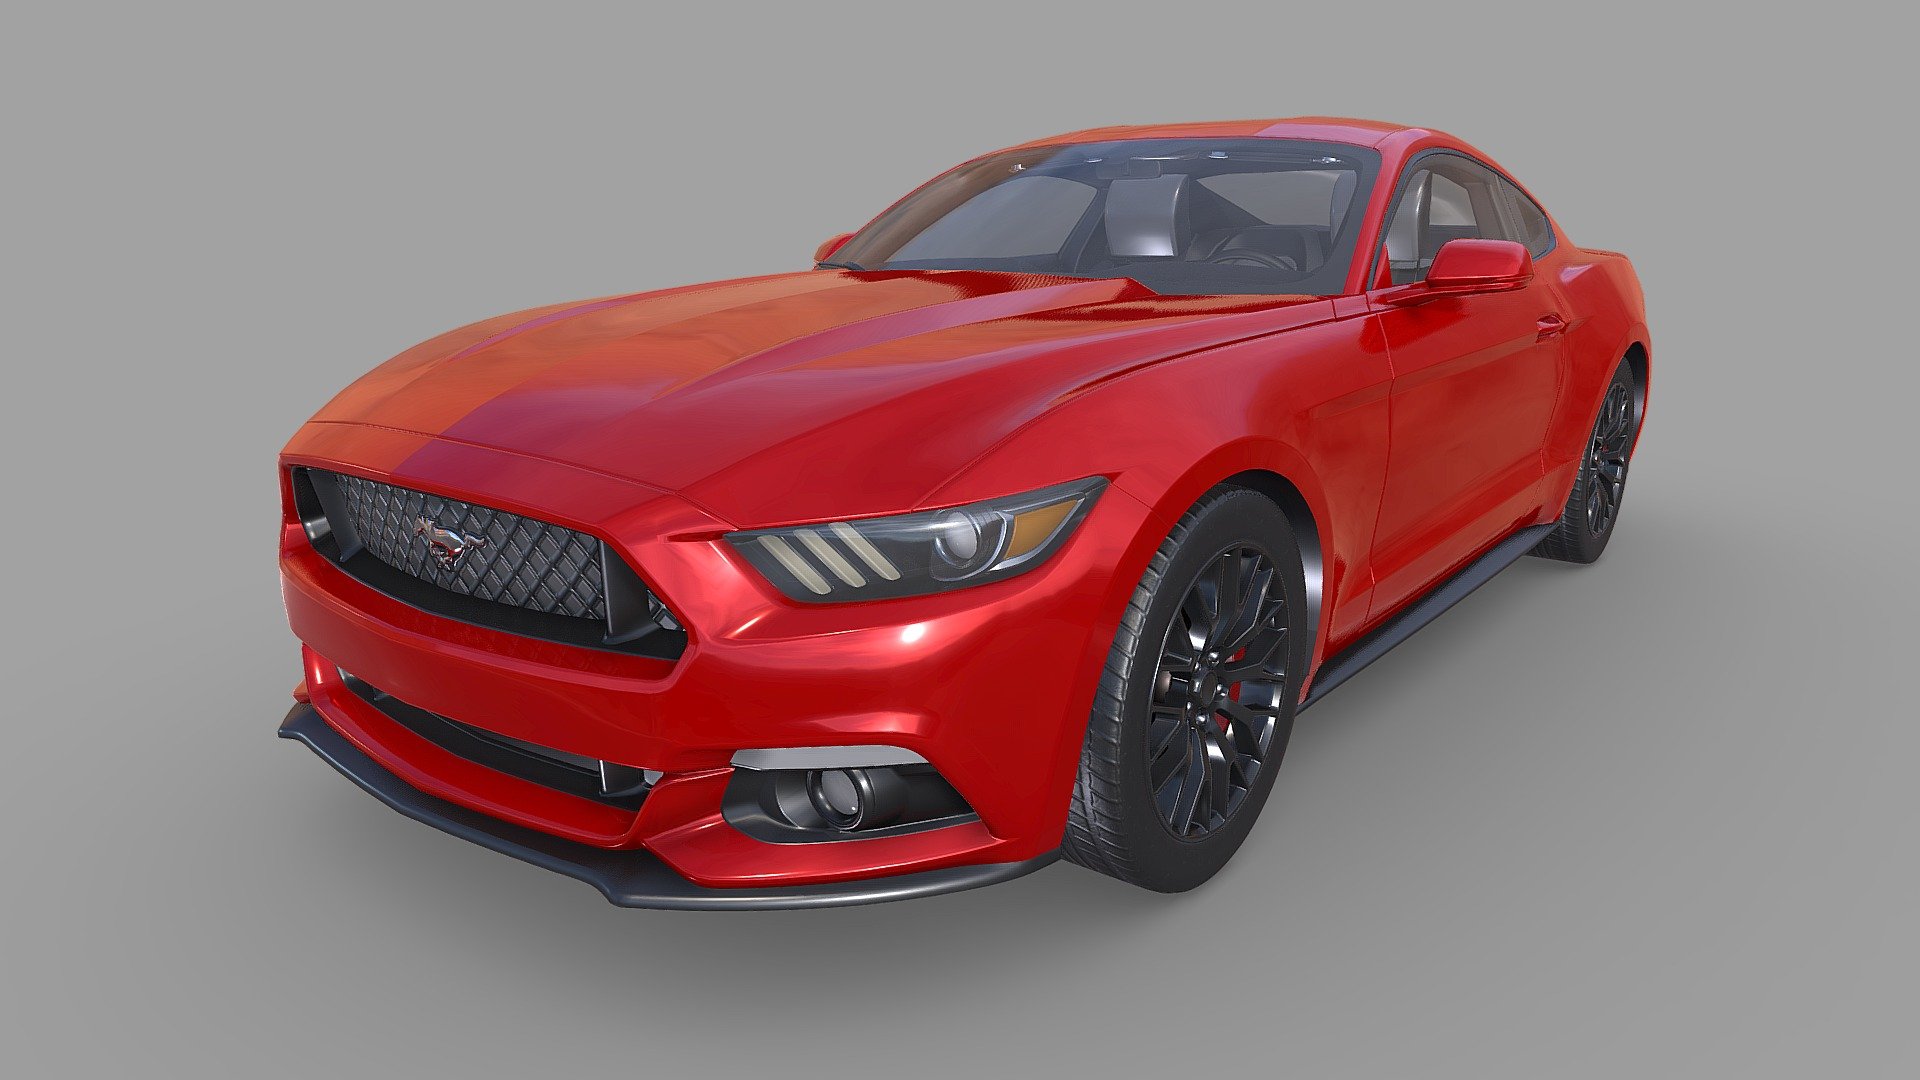 Car - Ford Mustang 2015 3D Model
Made in Blender 3D / Substance 3D Painter
Game ready (Unity 3D / Unreal Engine) - Ford Mustang 2015 - Buy Royalty Free 3D model by A.I.R (@air3dart) 3d model